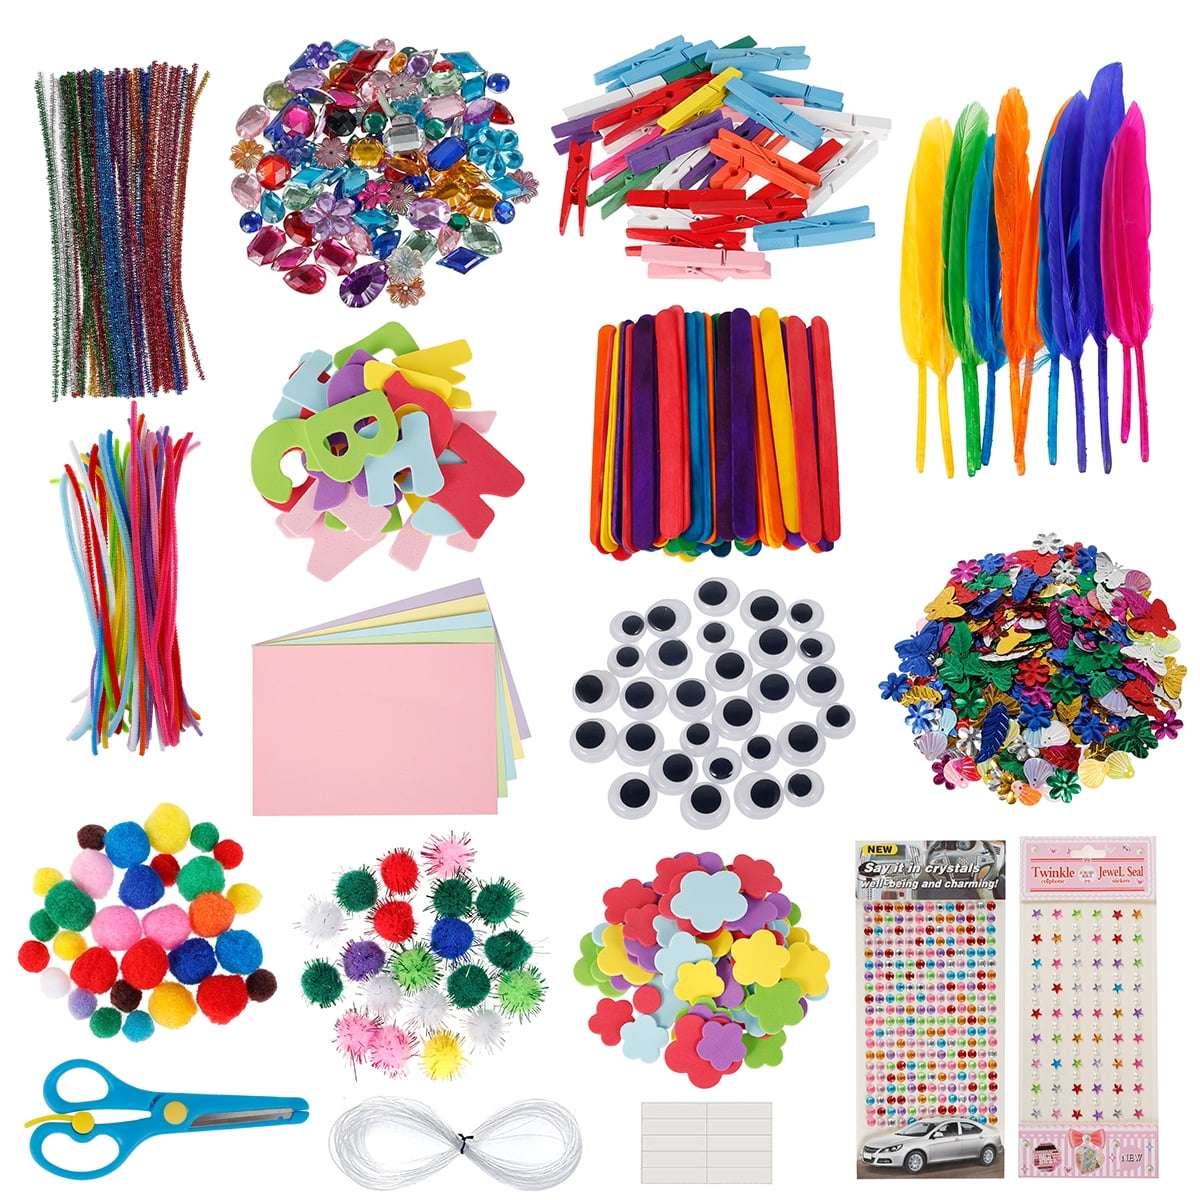 Arts and Crafts for Kids - Art Supplies Craft Kits for Boys & Girls - Includes 3000+ Pcs The Ultimate Craft Box with 99 Activities Book for Ages 4-6